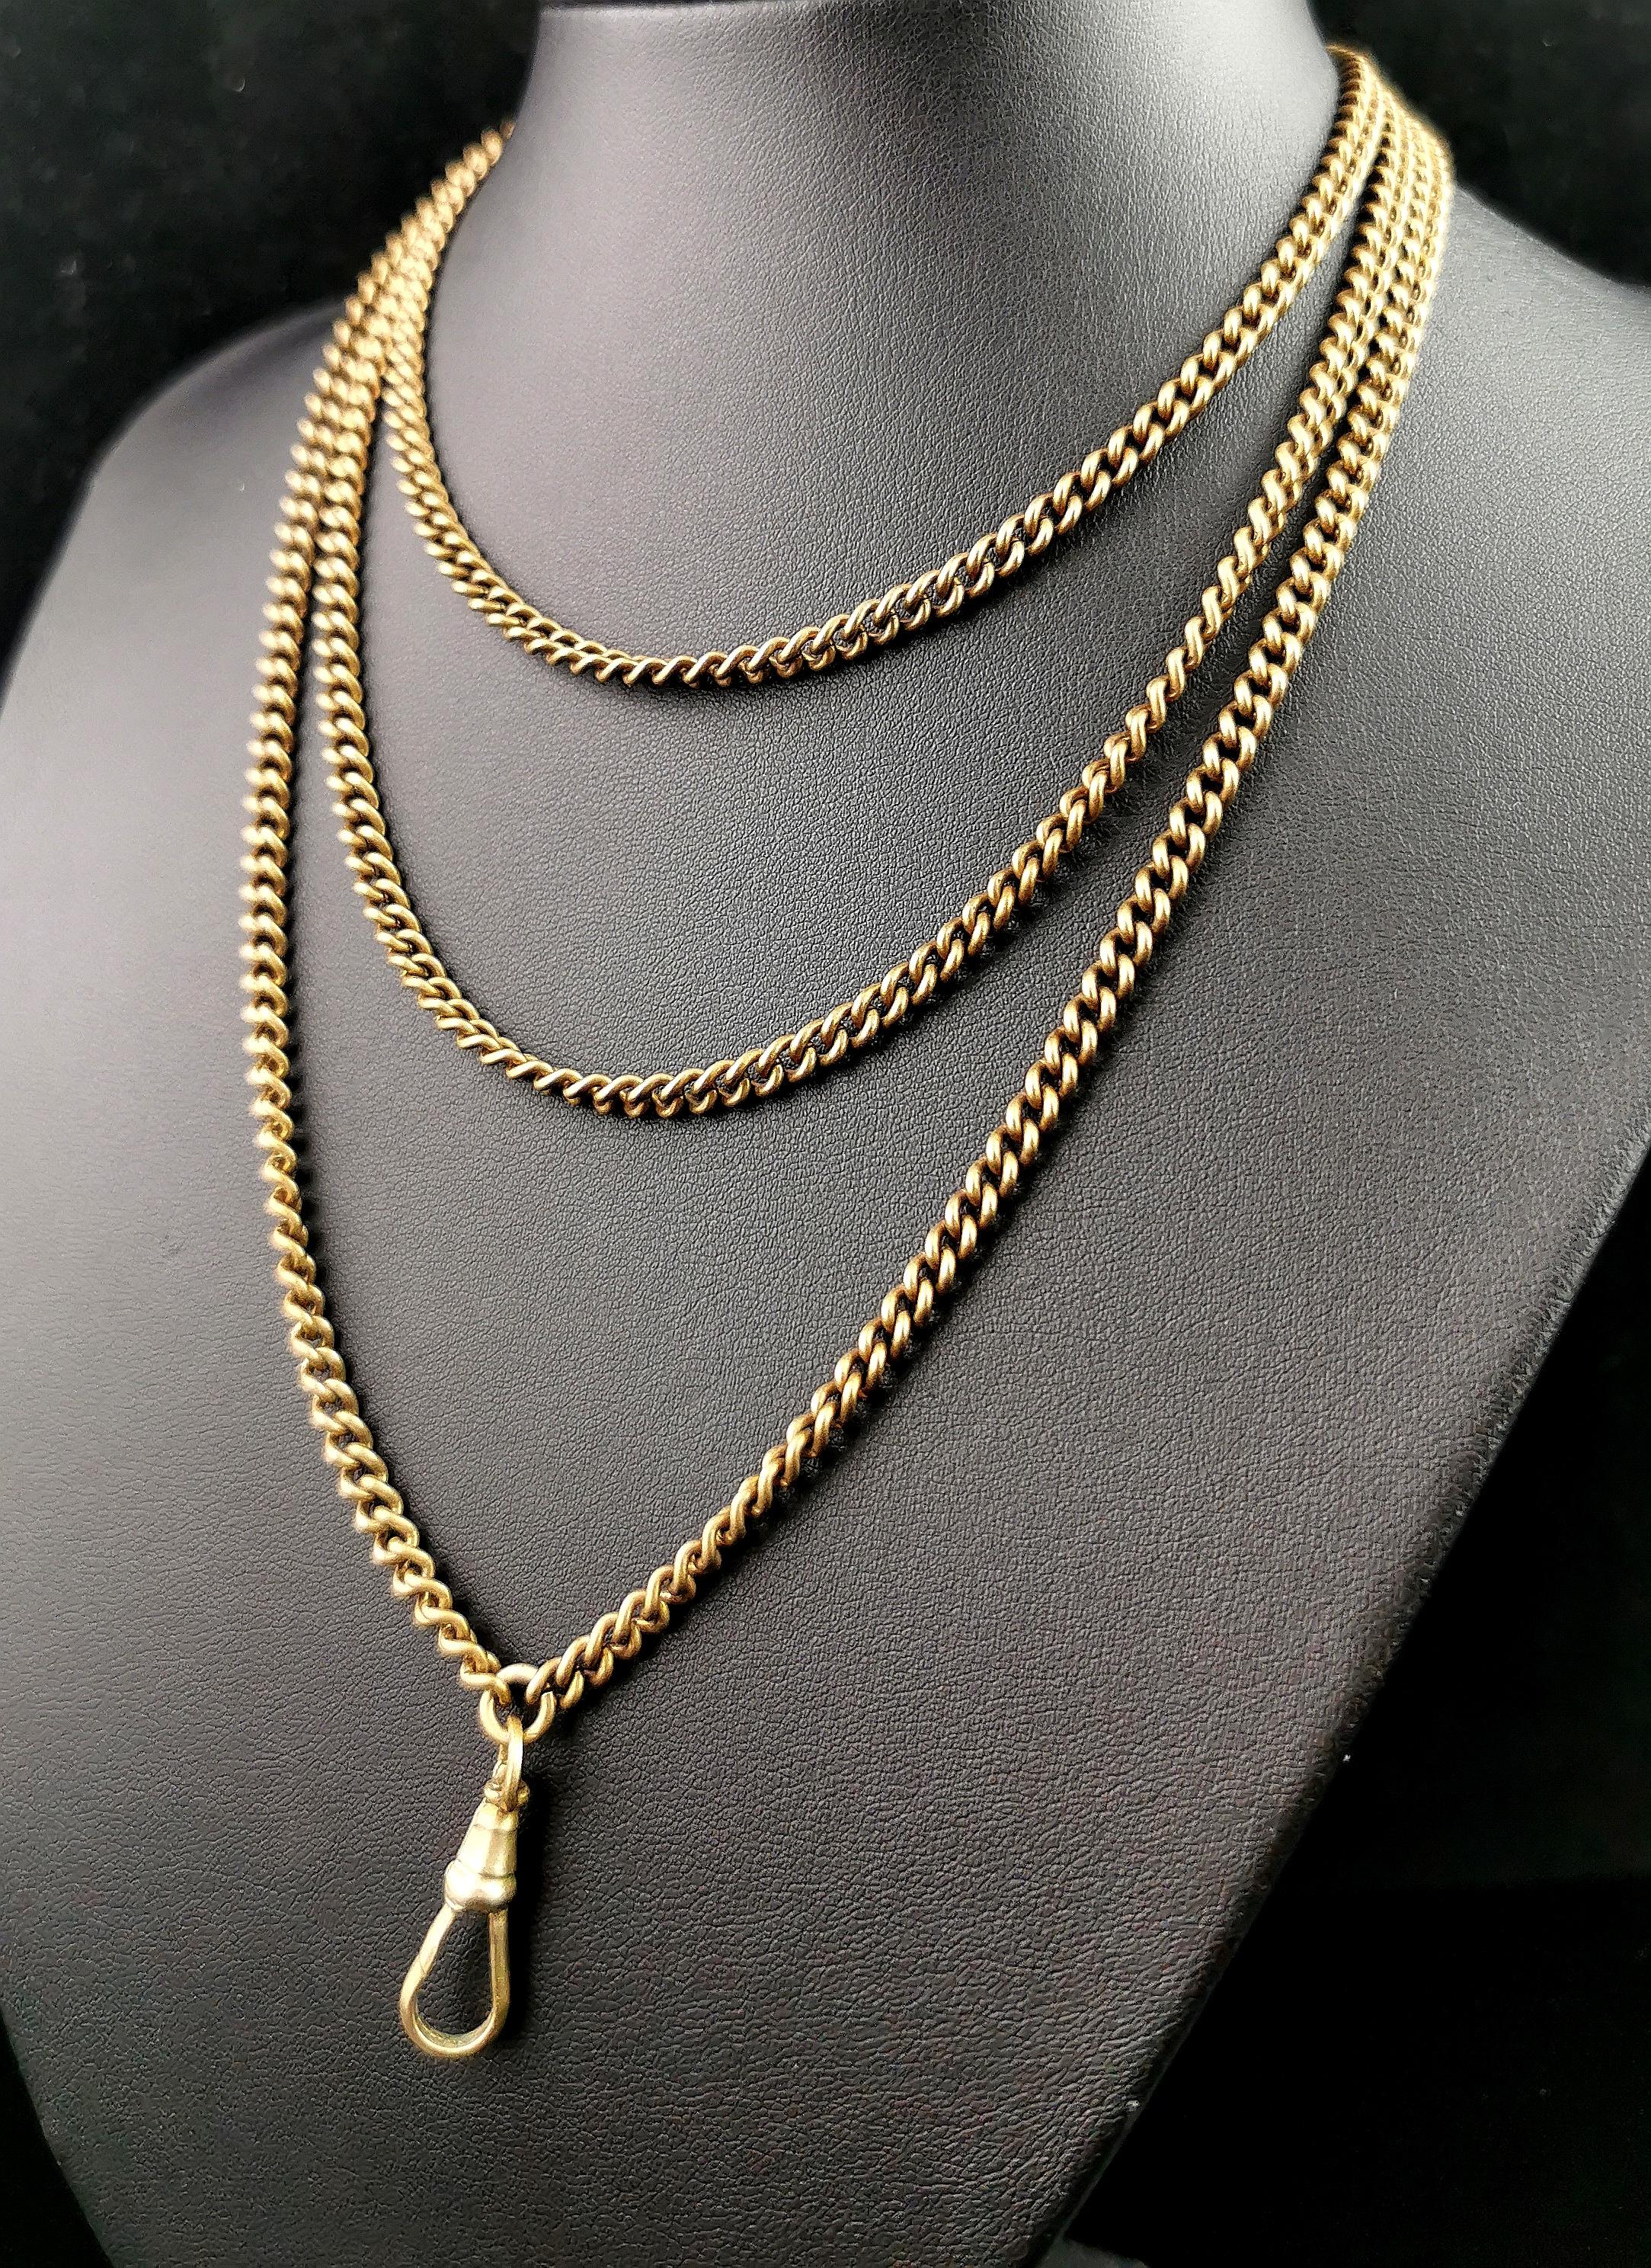 Antique Victorian longuard chain necklace, Gold plated, Curb link  11